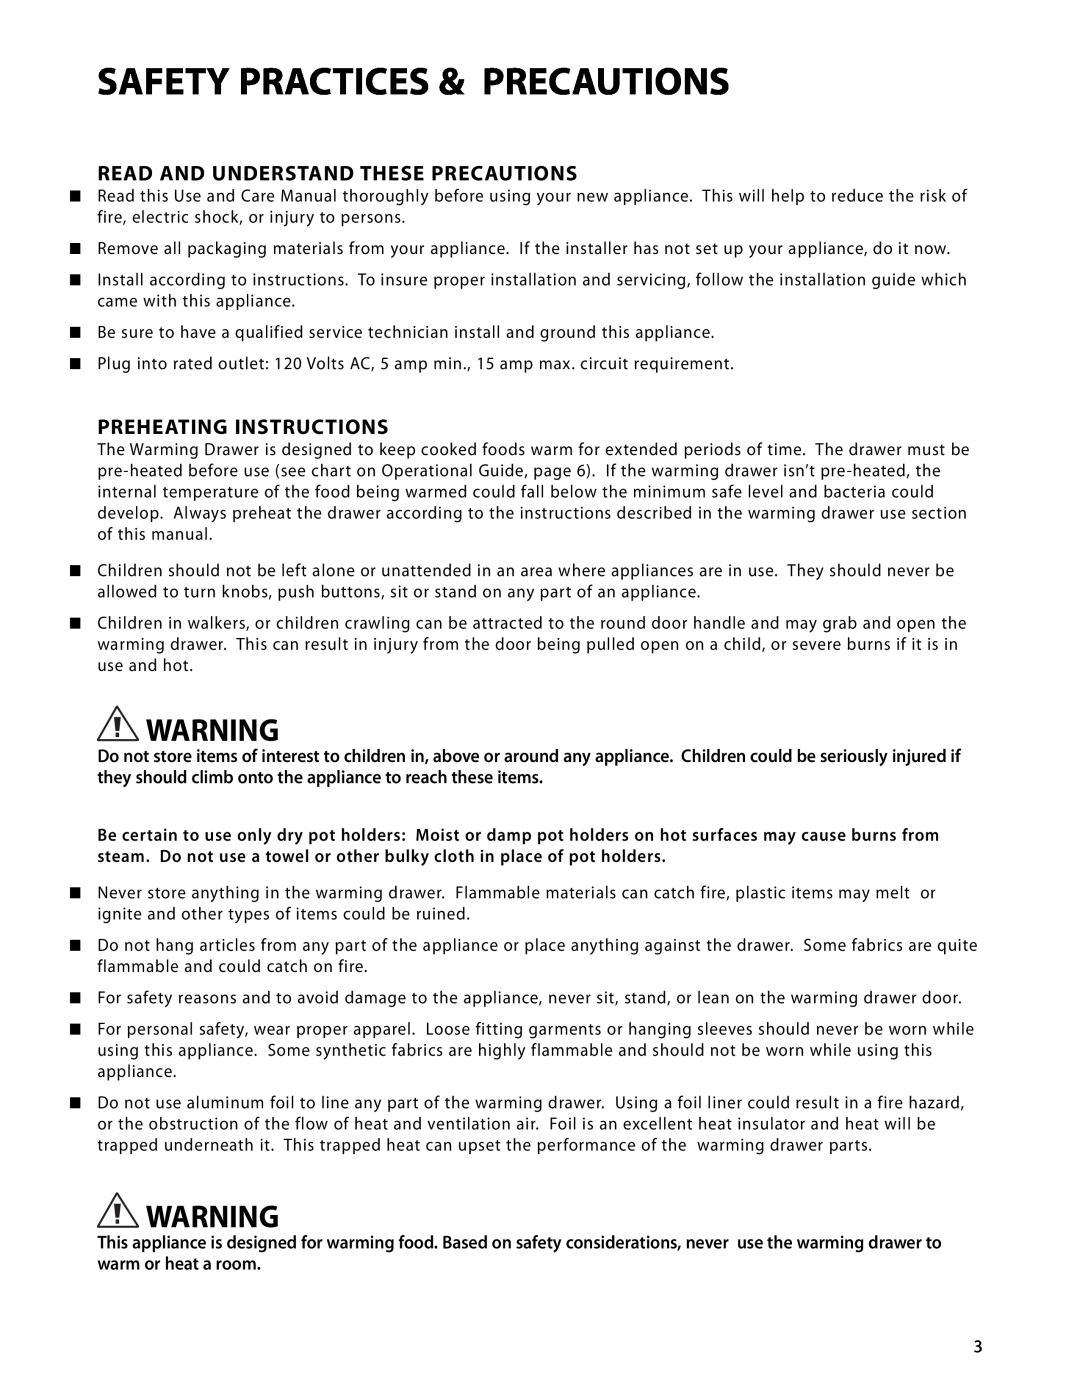 DCS WDTI, WDT-30 manual Safety Practices & Precautions, Read And Understand These Precautions, Preheating Instructions 